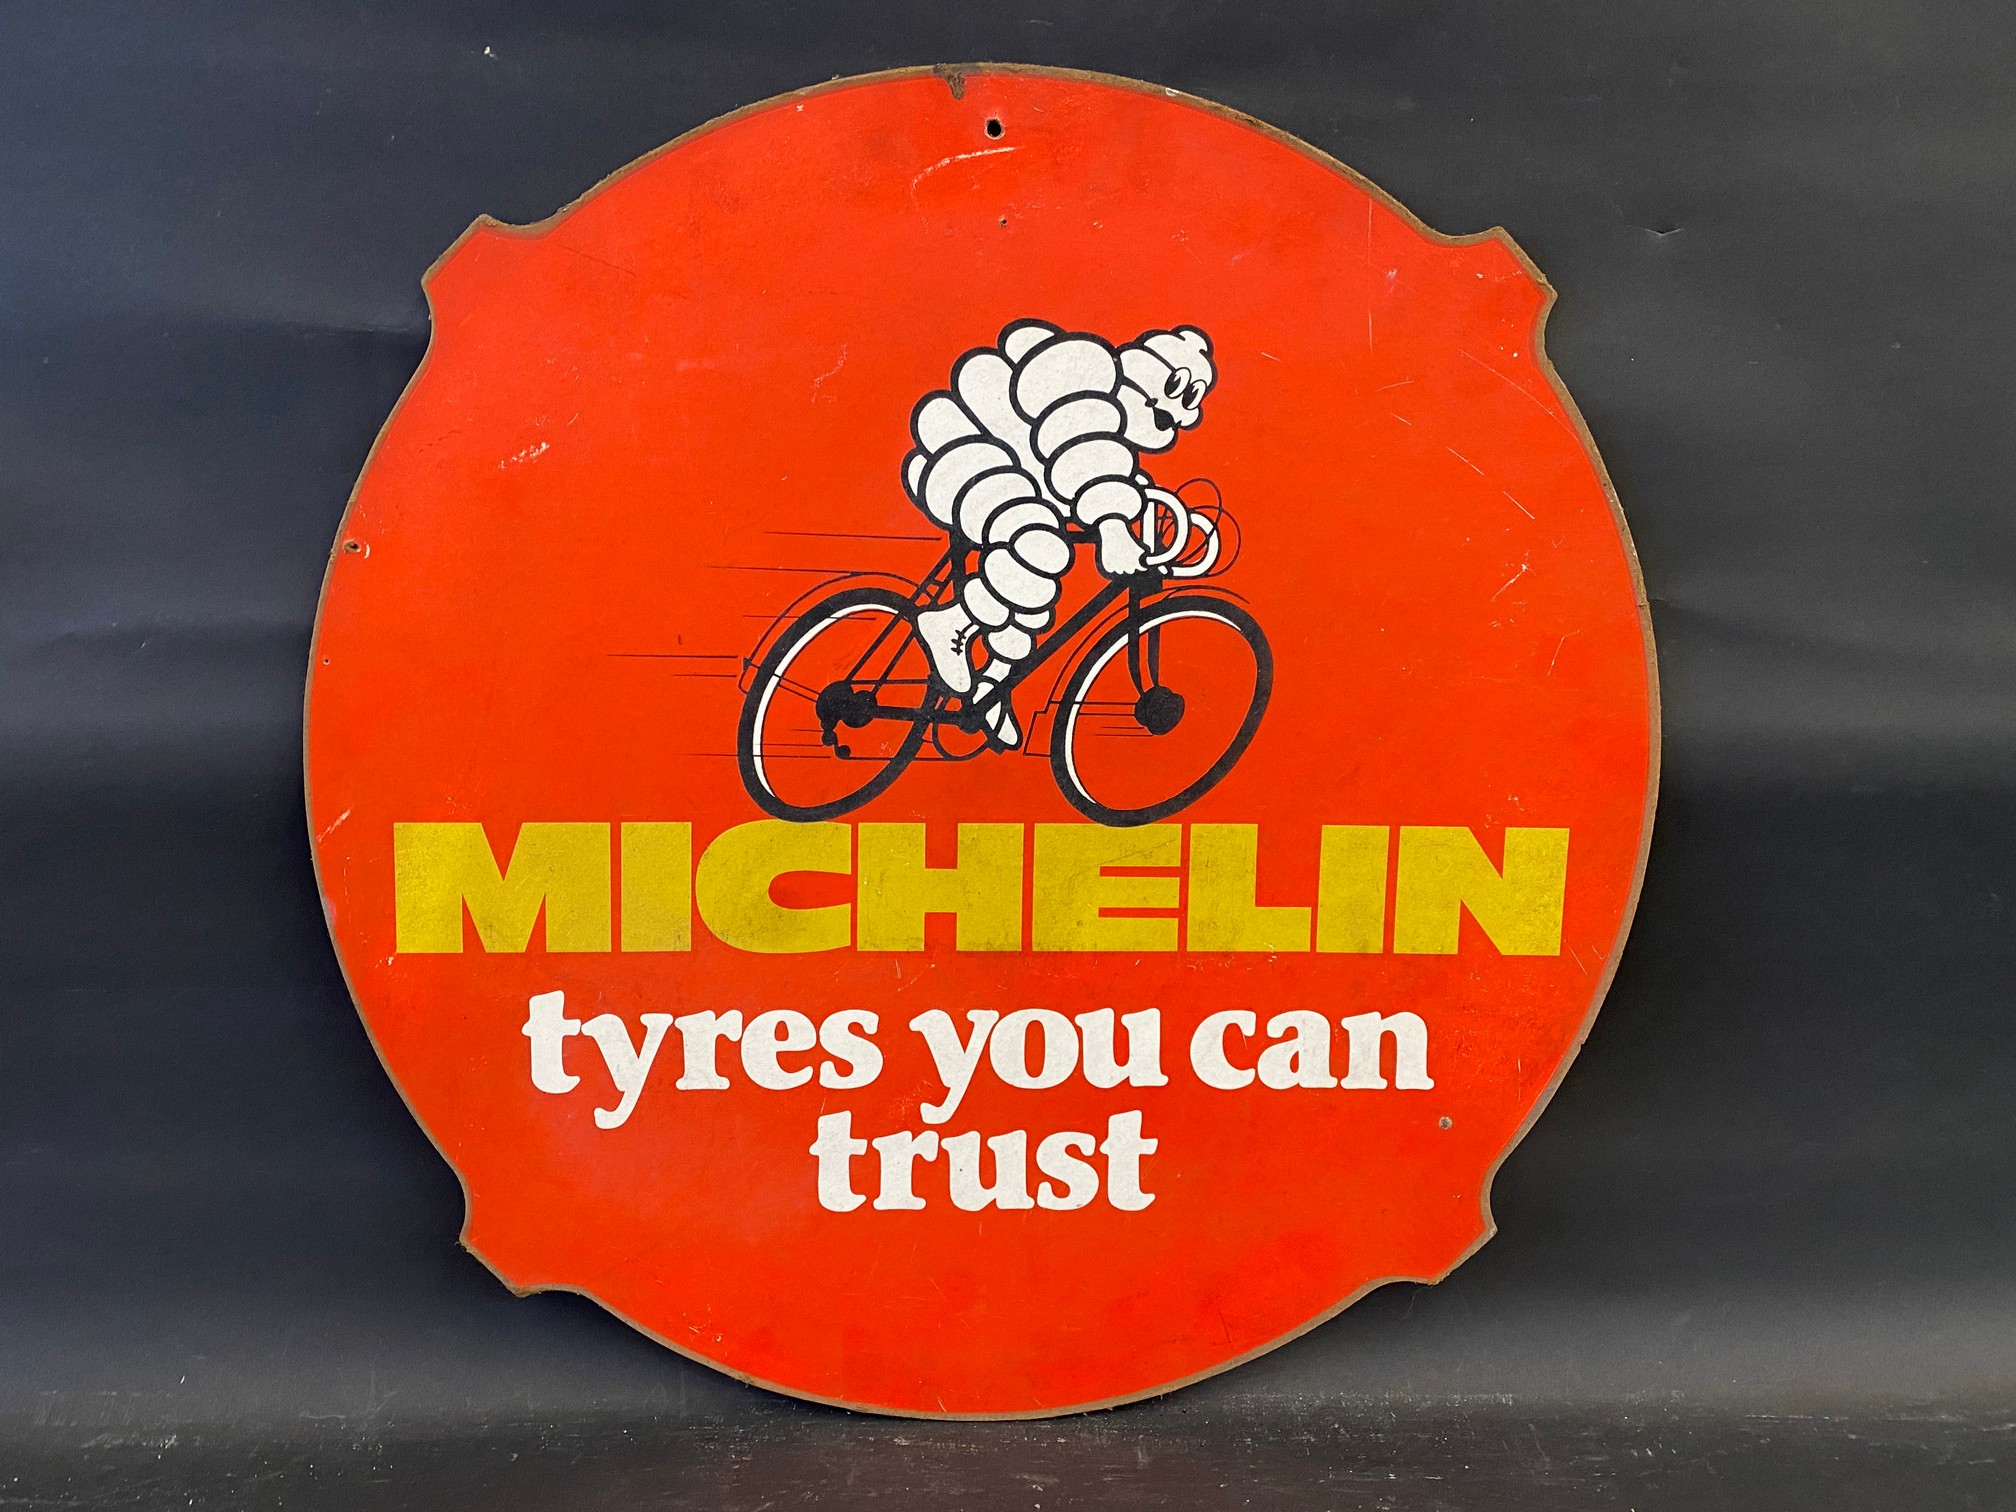 A Michelin bicycle pictorial hardboard advertising sign, 24" diameter.